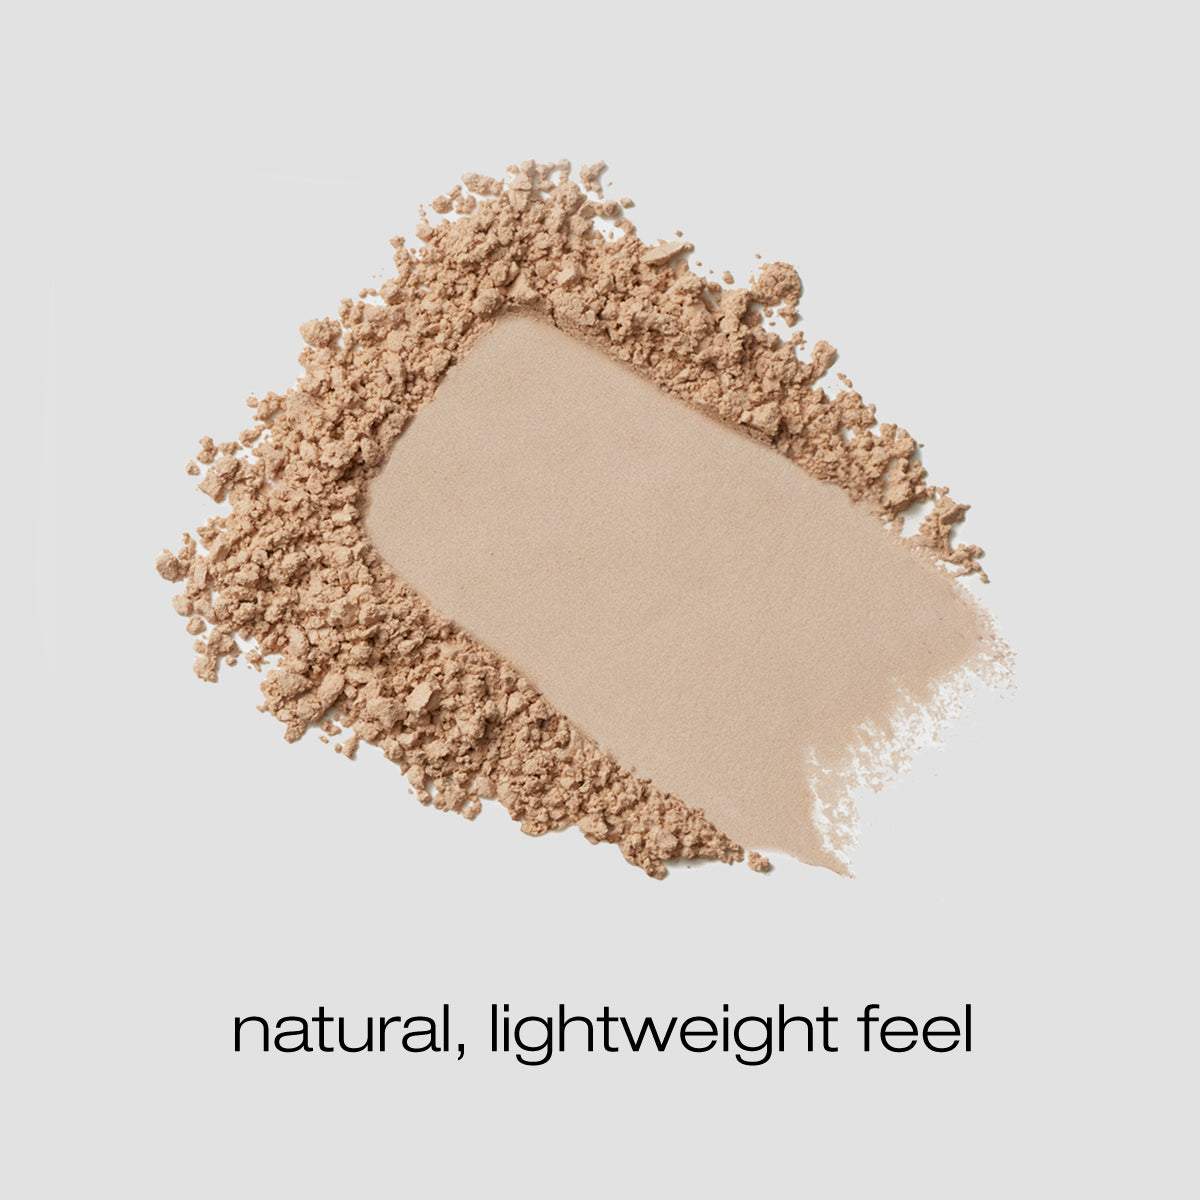 Spread of foundation powder described as a natural, lightweight feel'